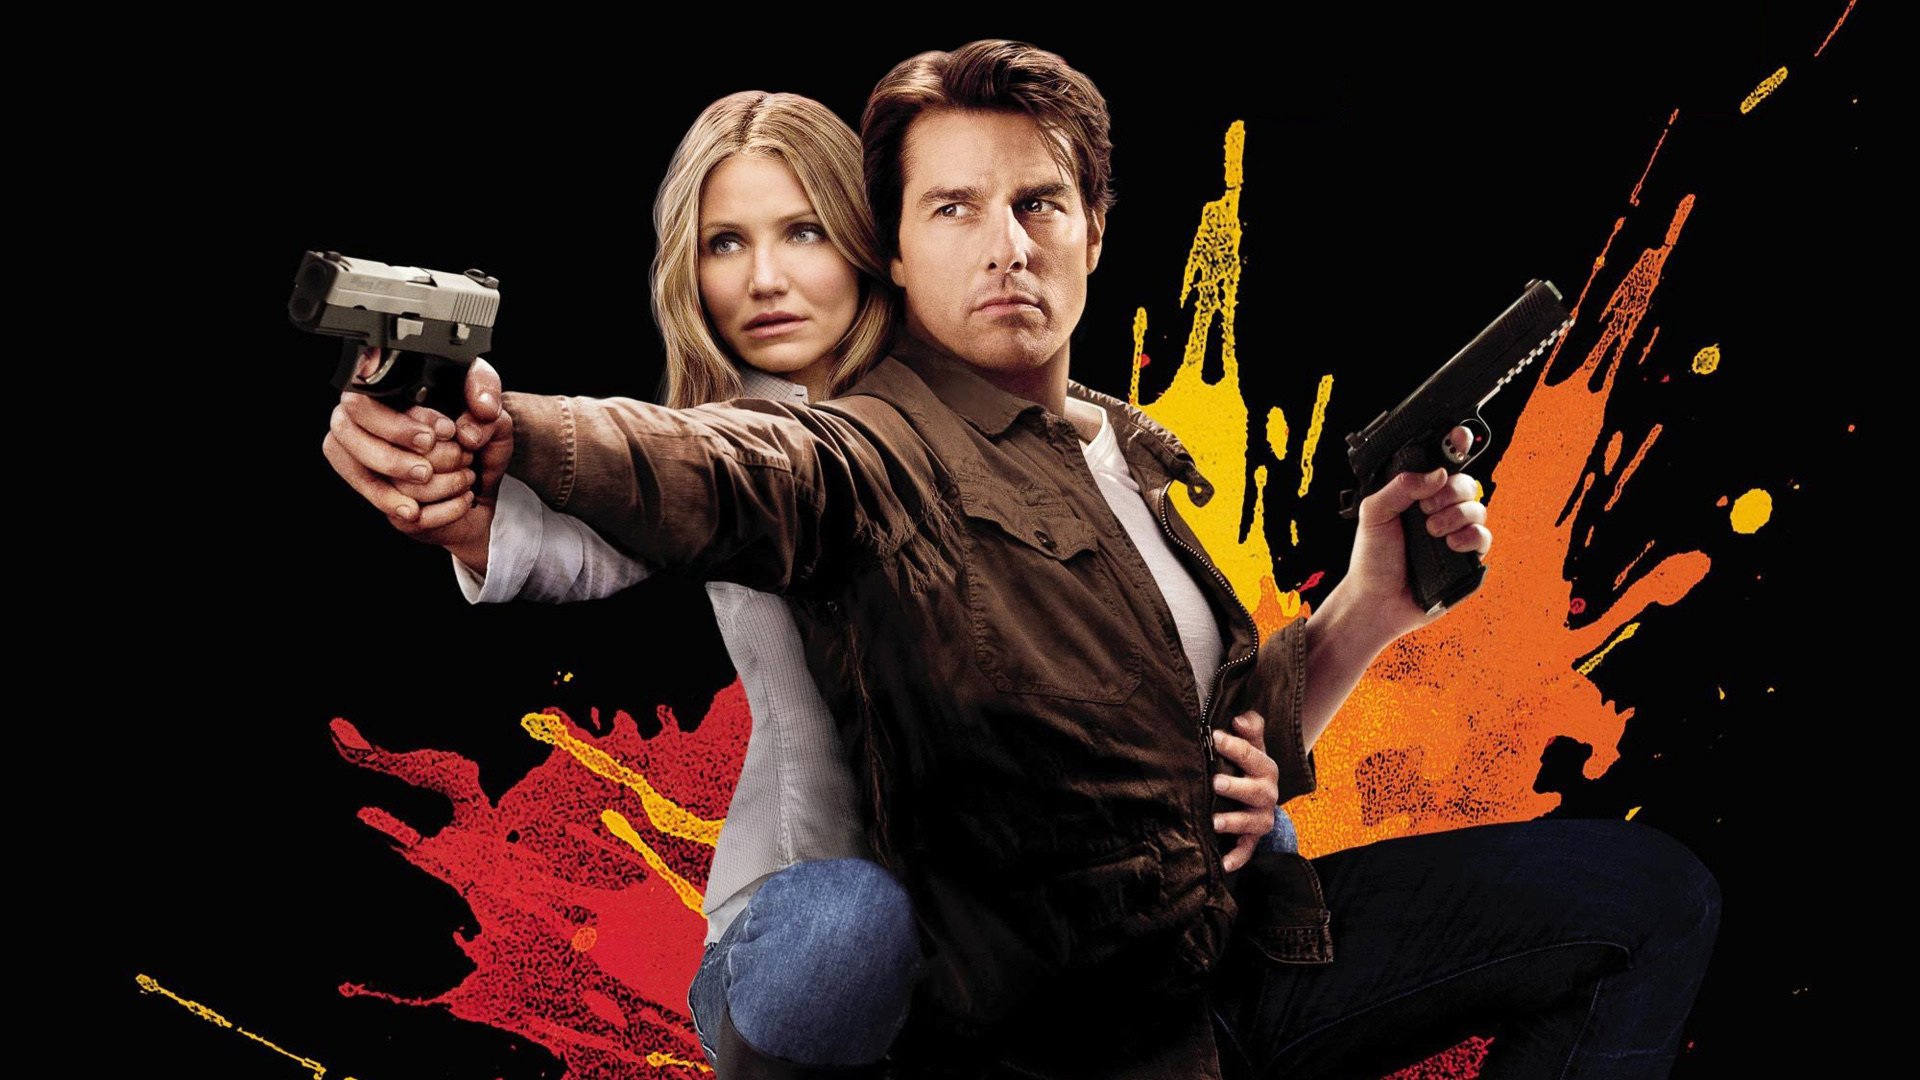 movie with tom cruise and cameron diaz